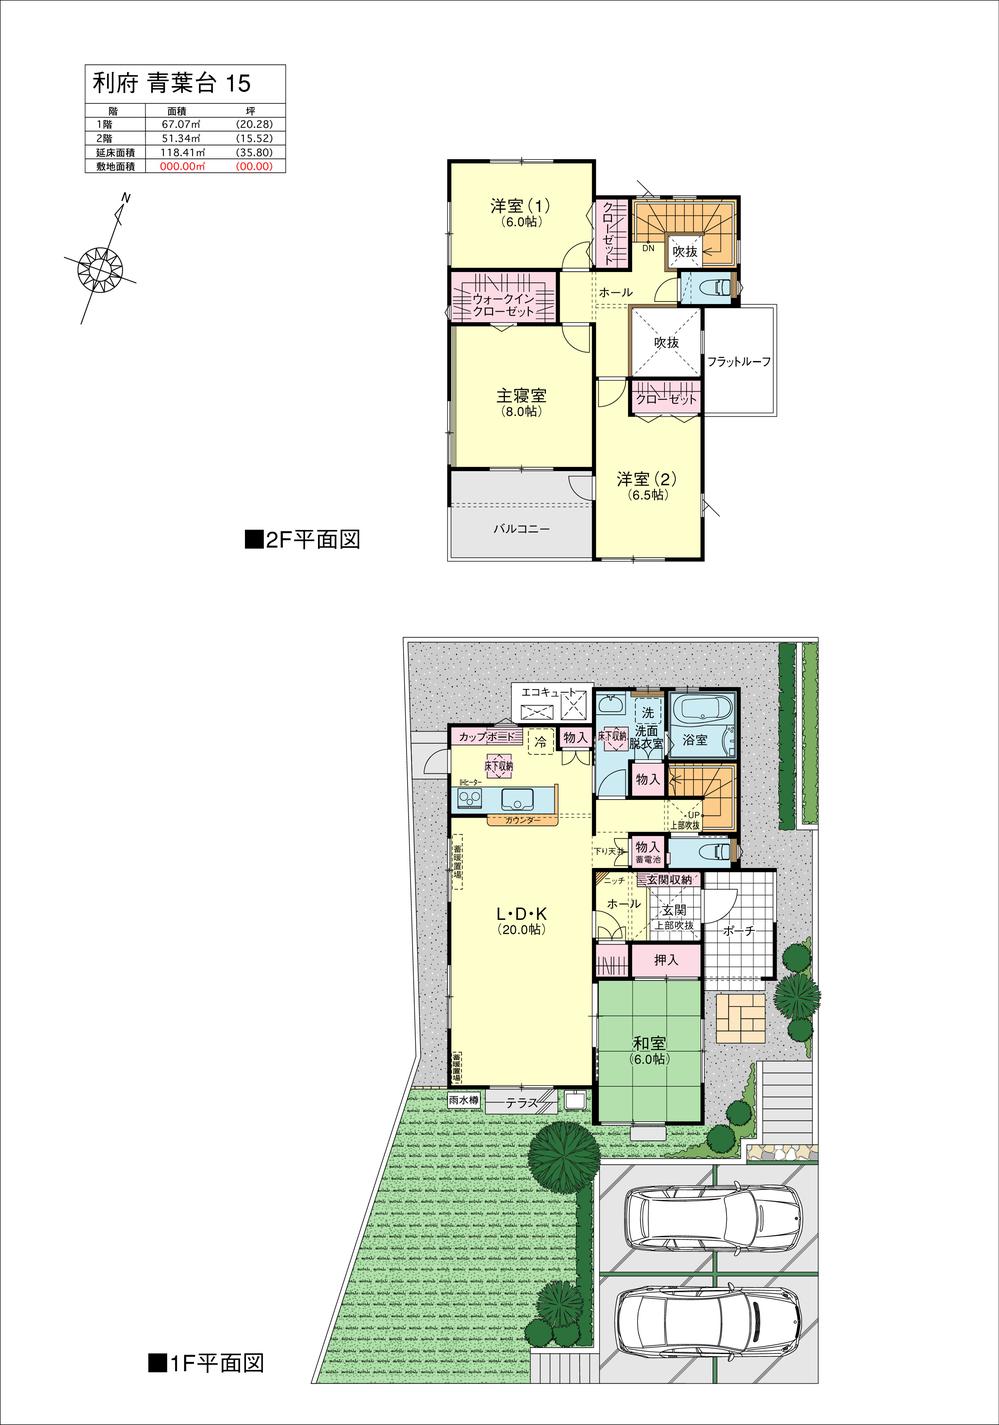 Floor plan. All building You difference floor plan and appearance